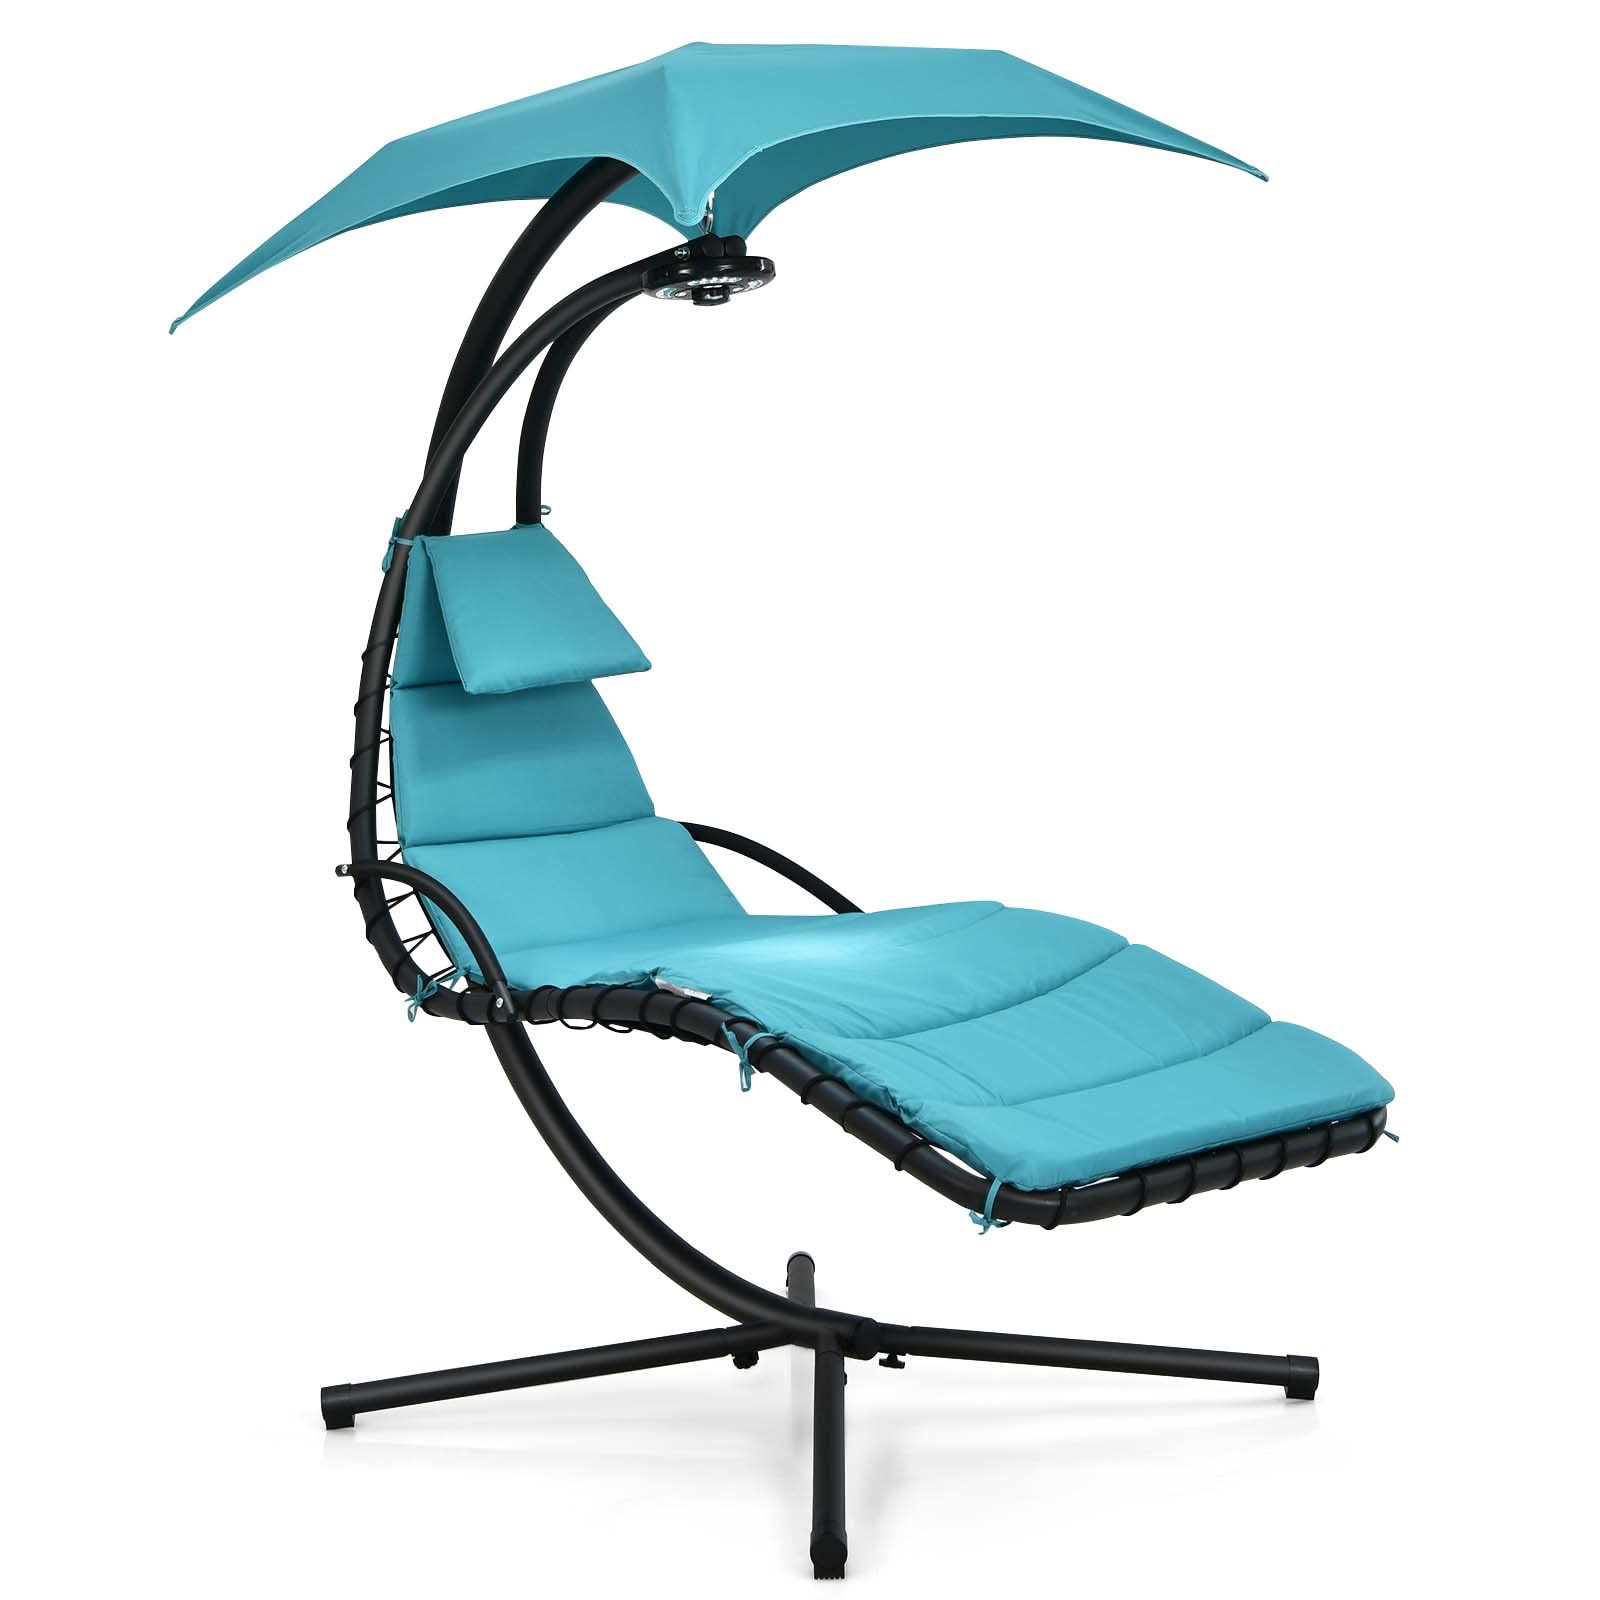 Hanging Chaise Outdoor Lounge Chair Porch Swing Hammock Chair with Arc Stand